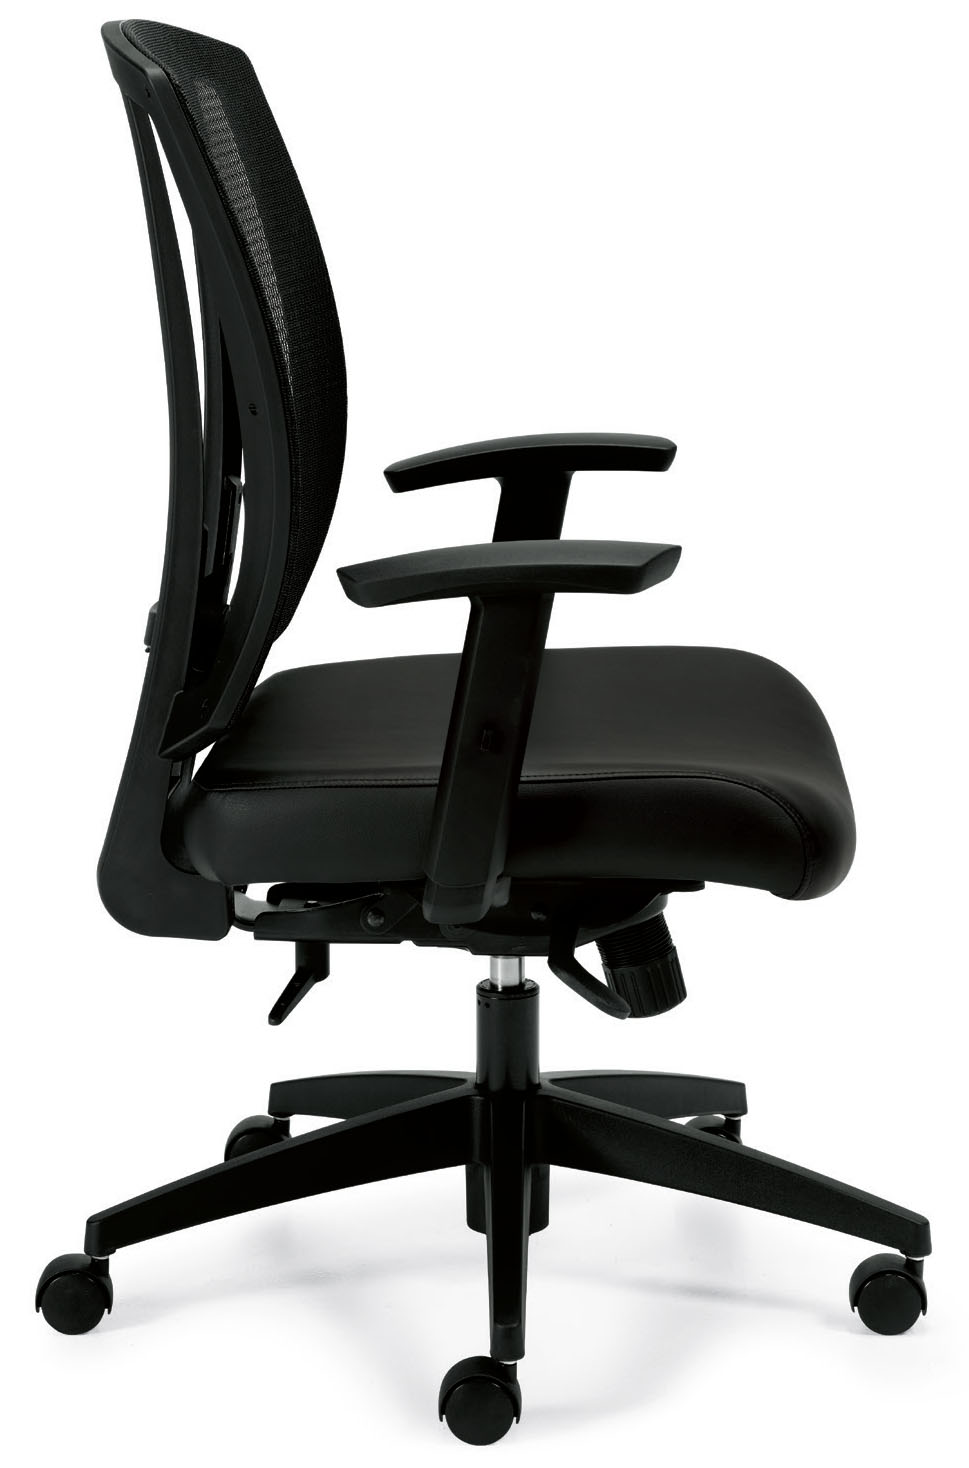 Offices To Go™ Mesh Back Managers Chair, OTG10900B